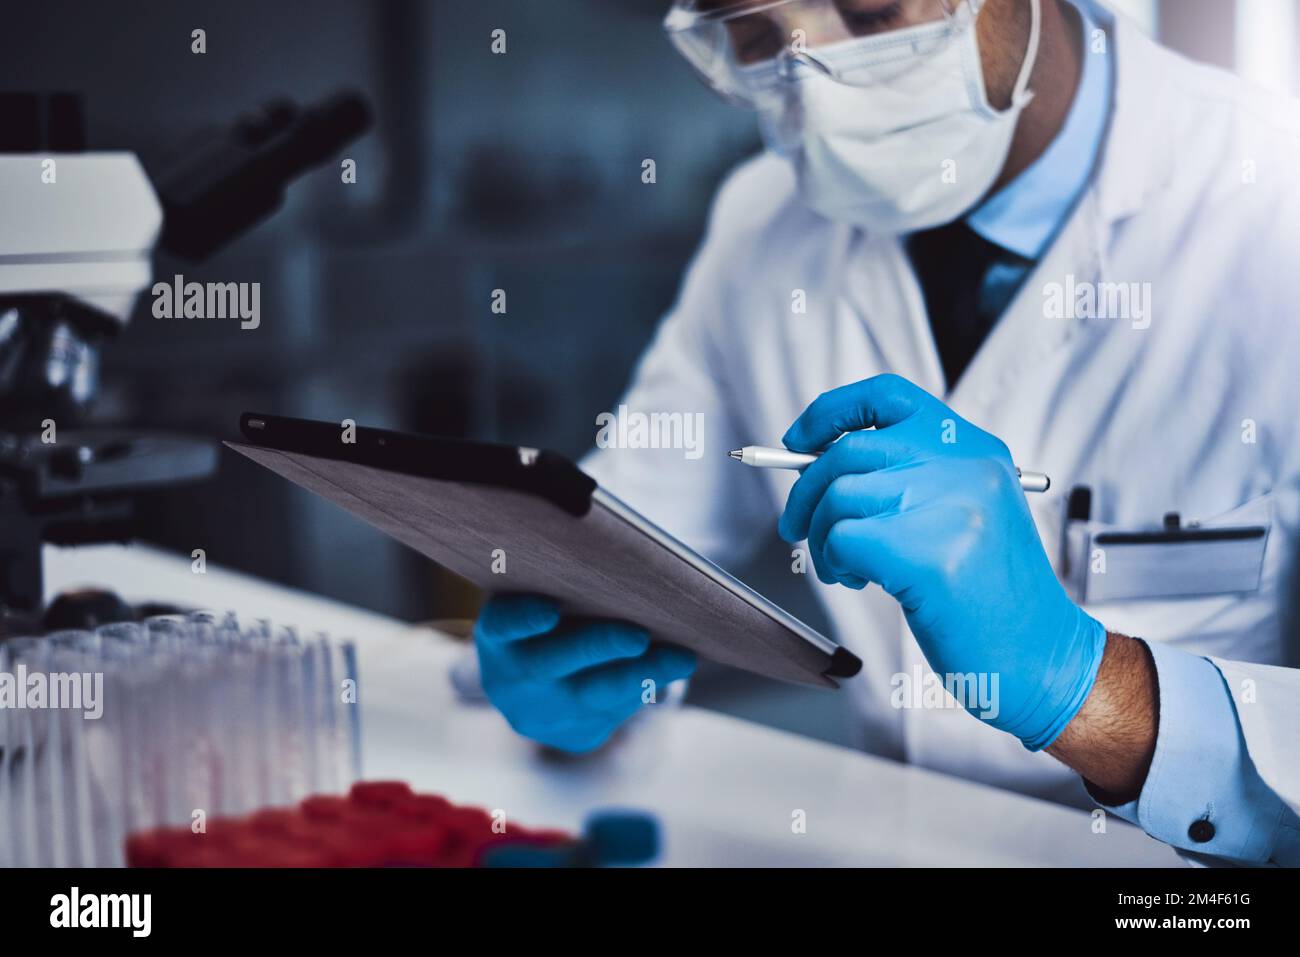 Ordering new lab equipment online. an unrecognizable male scientist working in a lab. Stock Photo